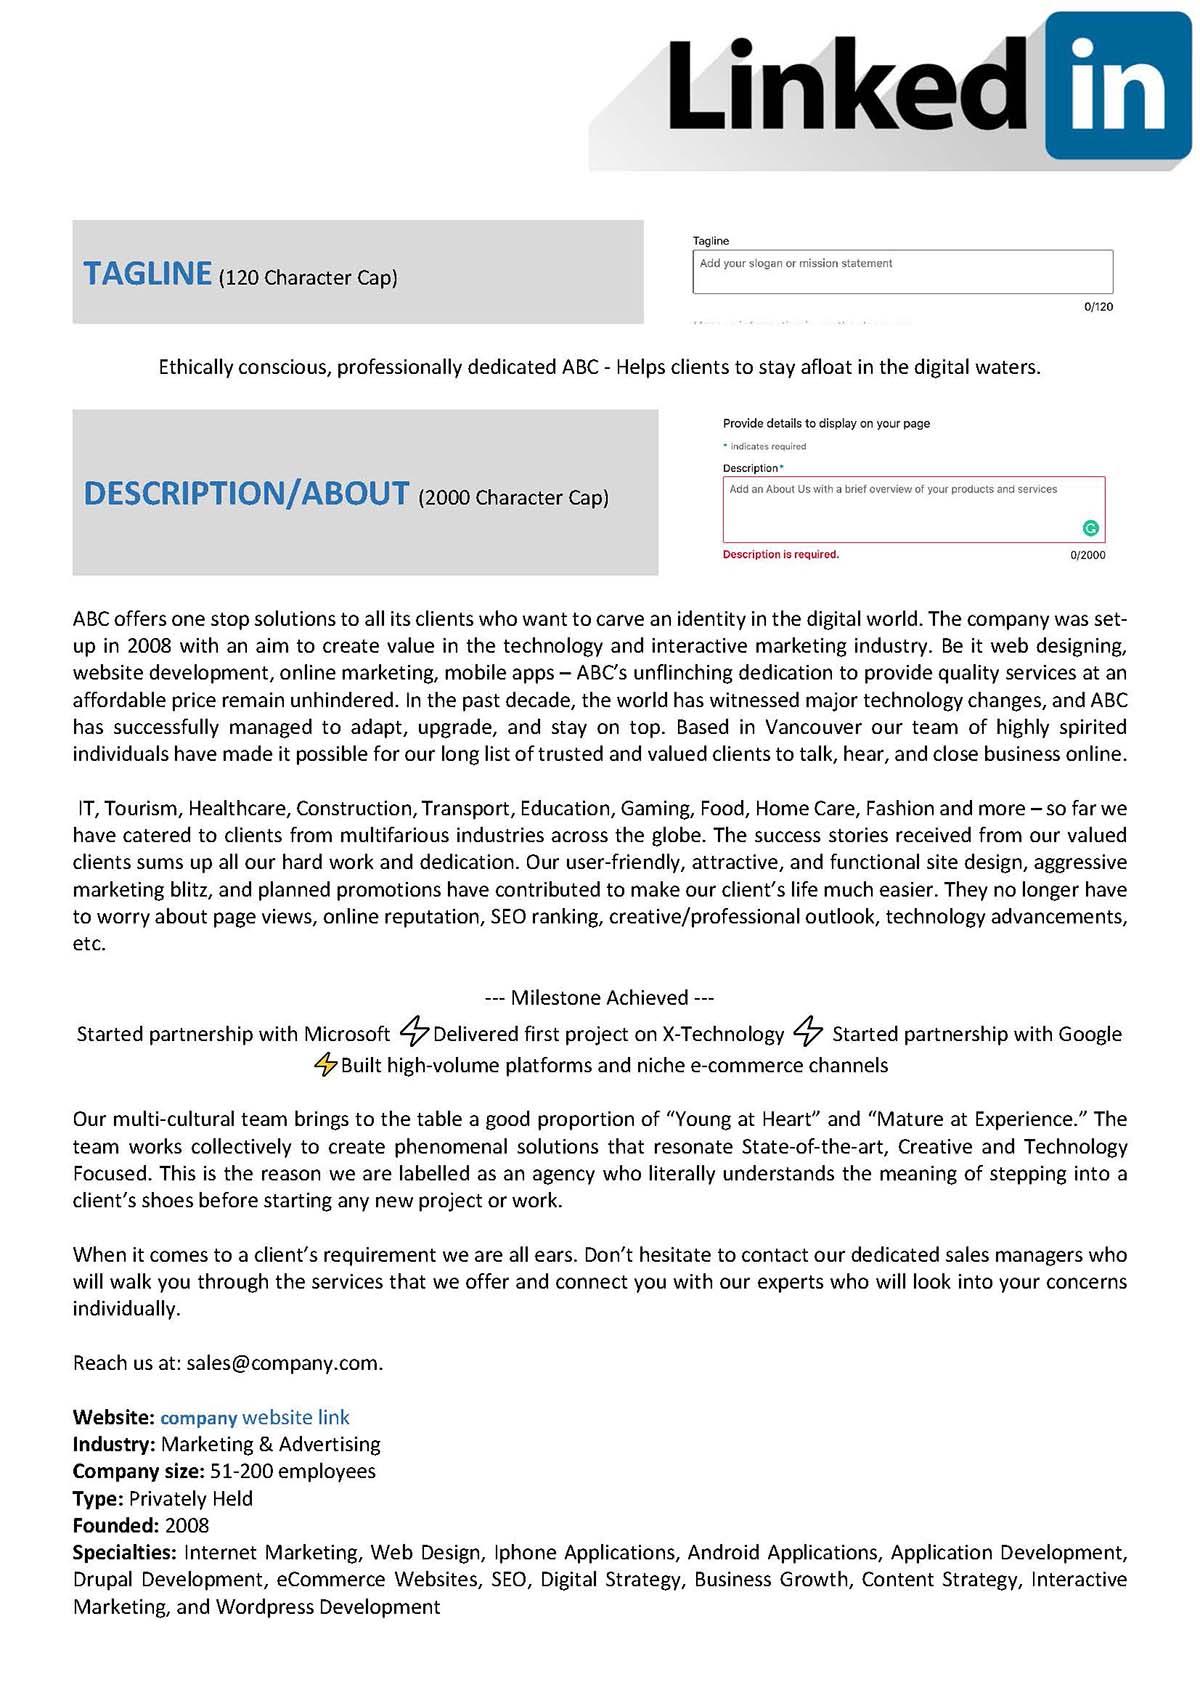 Sample resume: Internet Content, Mid Experience, Functional